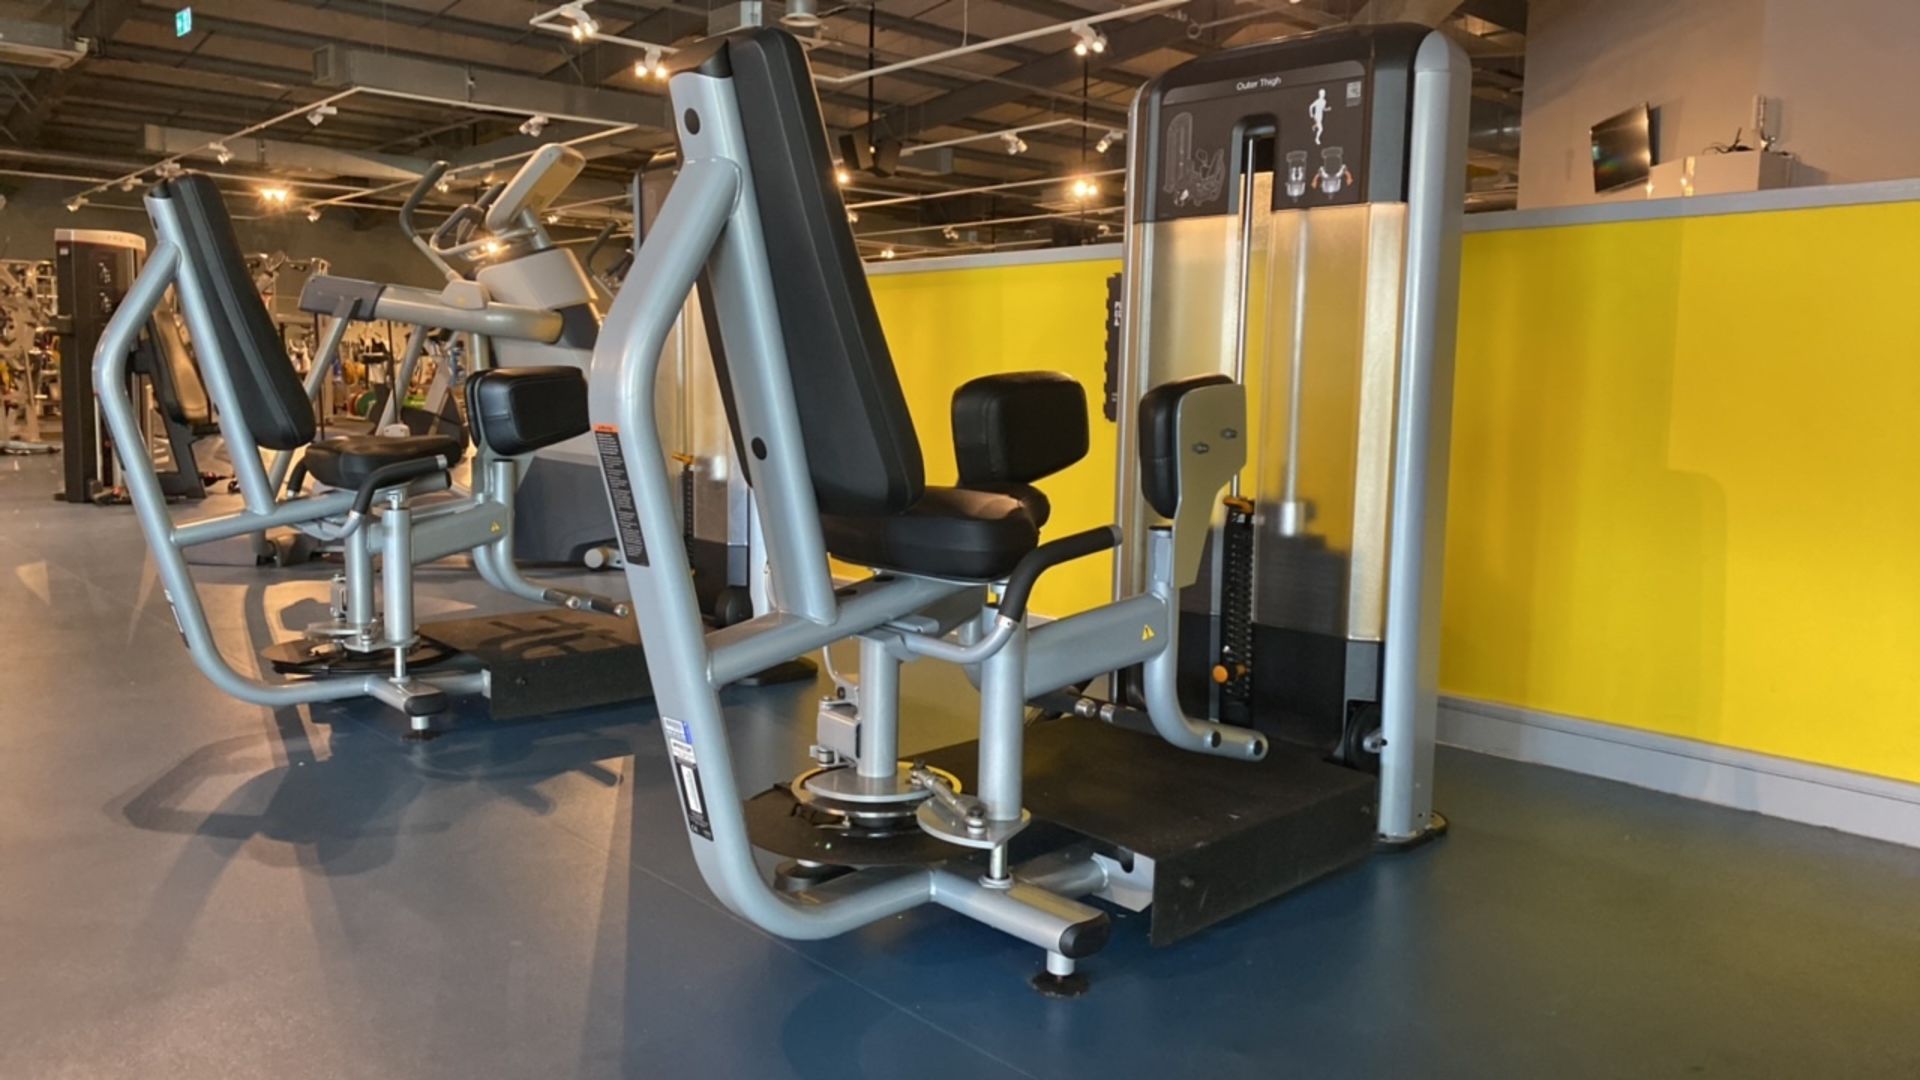 Precor Outer Thigh Machine - Image 2 of 5